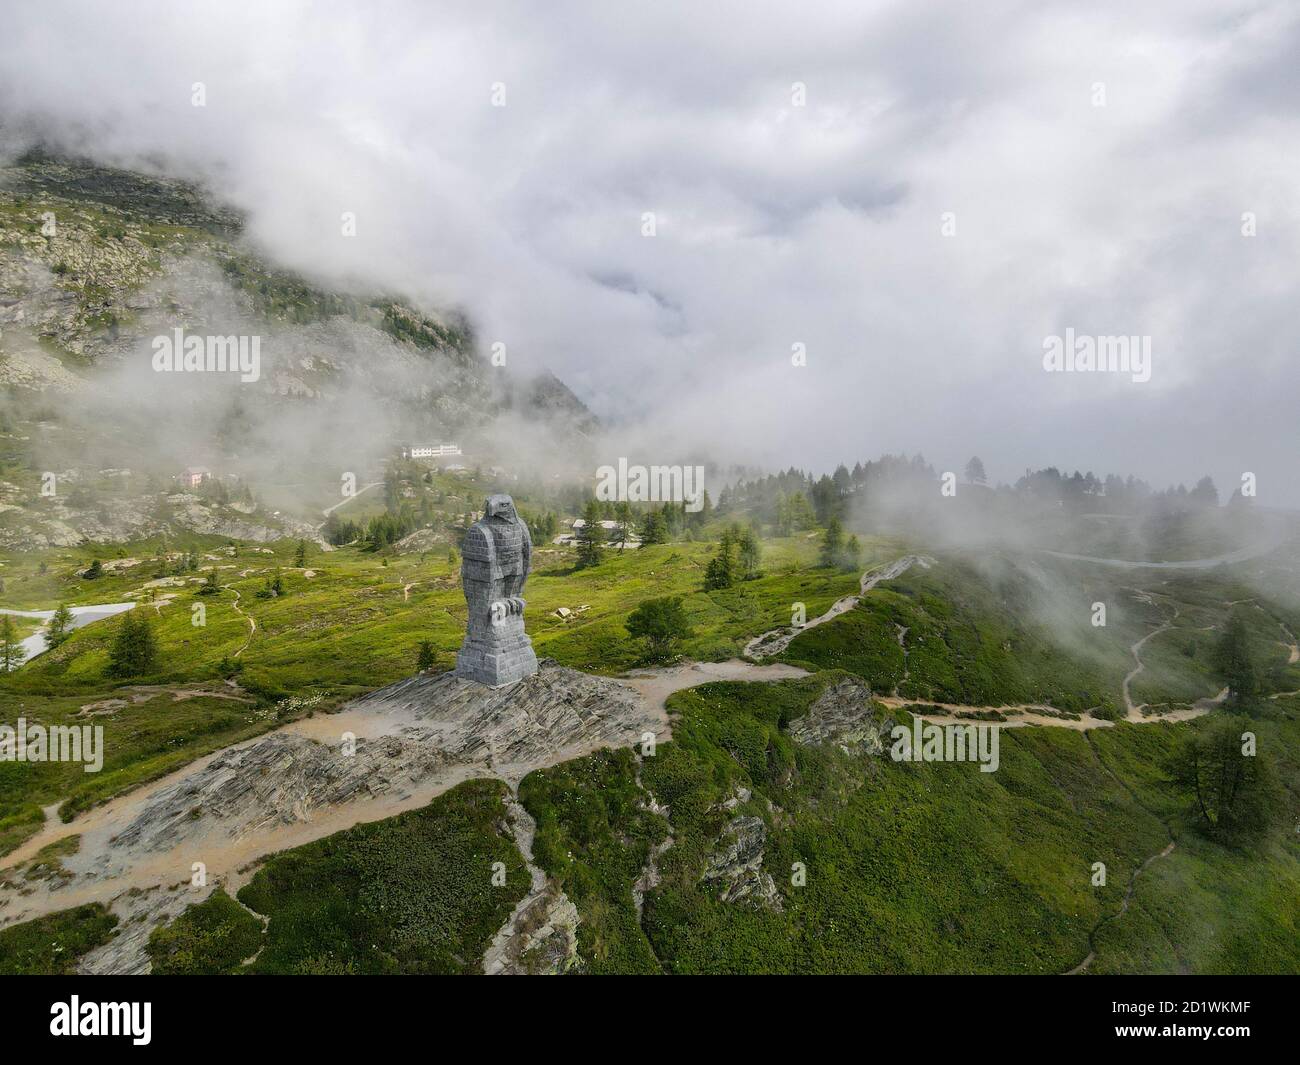 The eagle statue on the Simplon pass in the alps between Switzerland and Italy Stock Photo